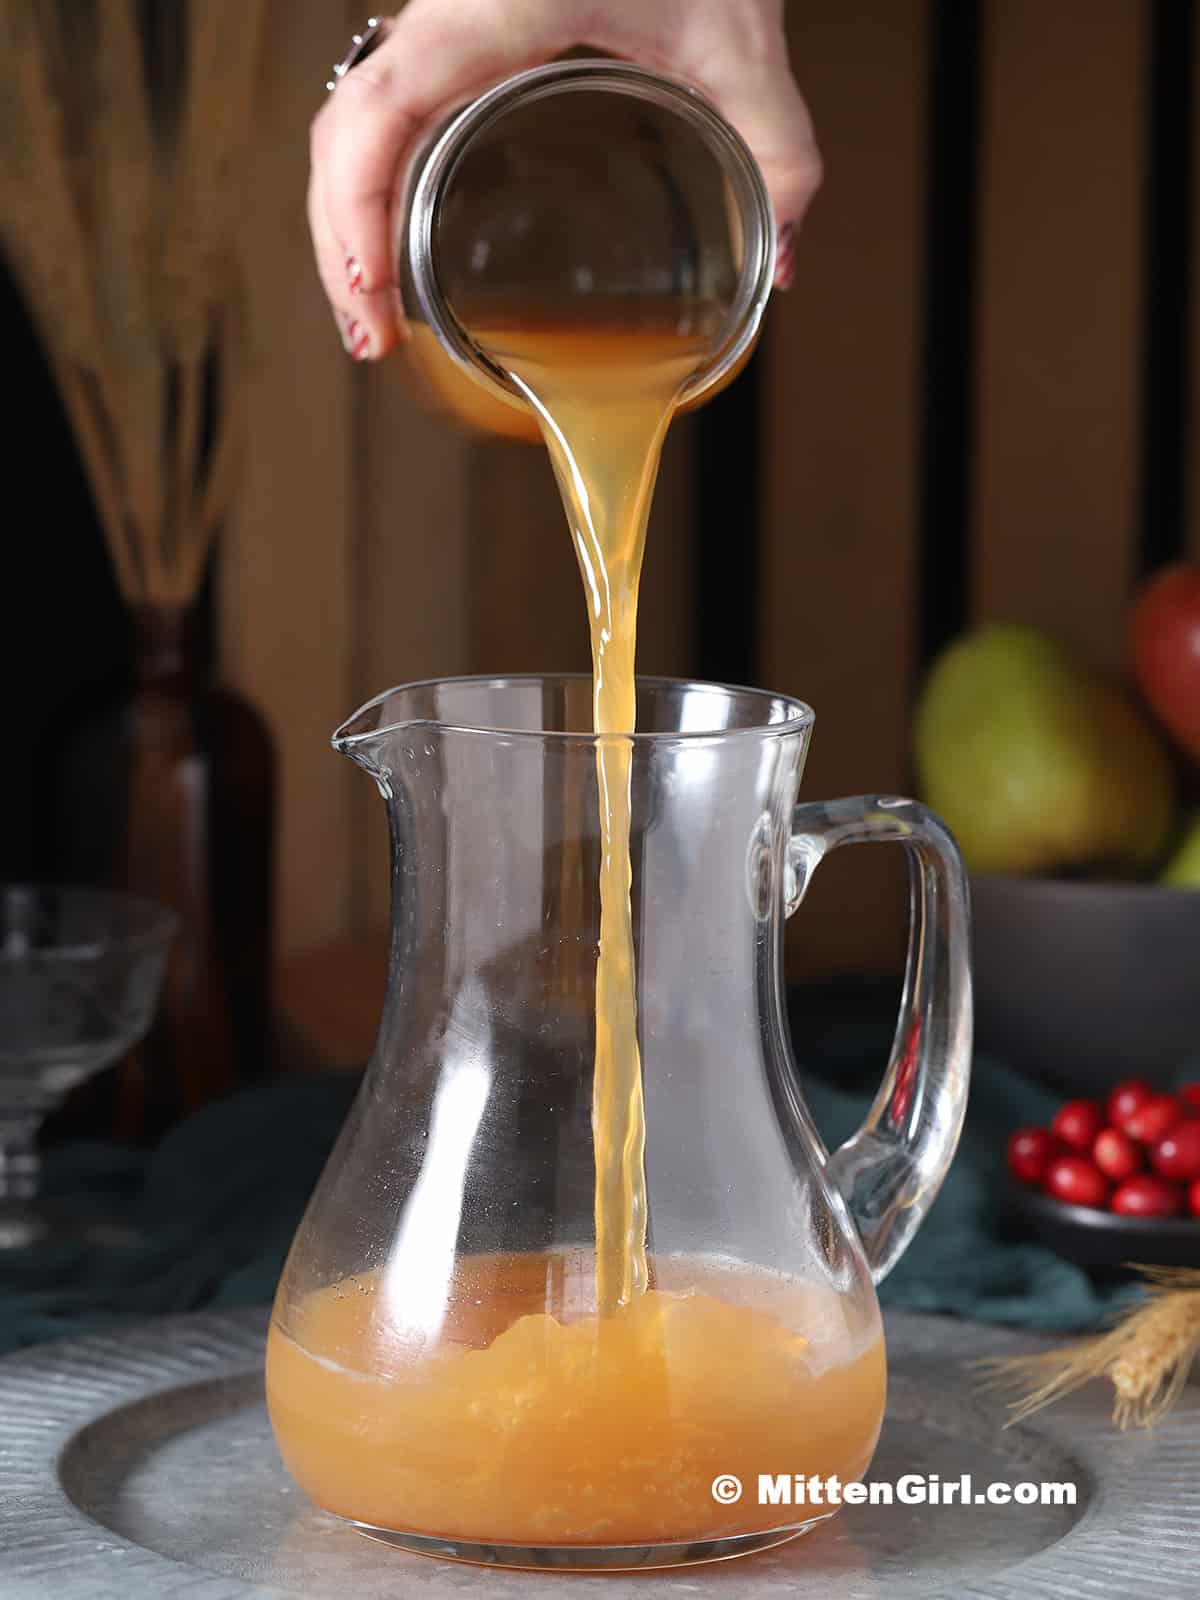 Apple cider being poured into a pitcher.